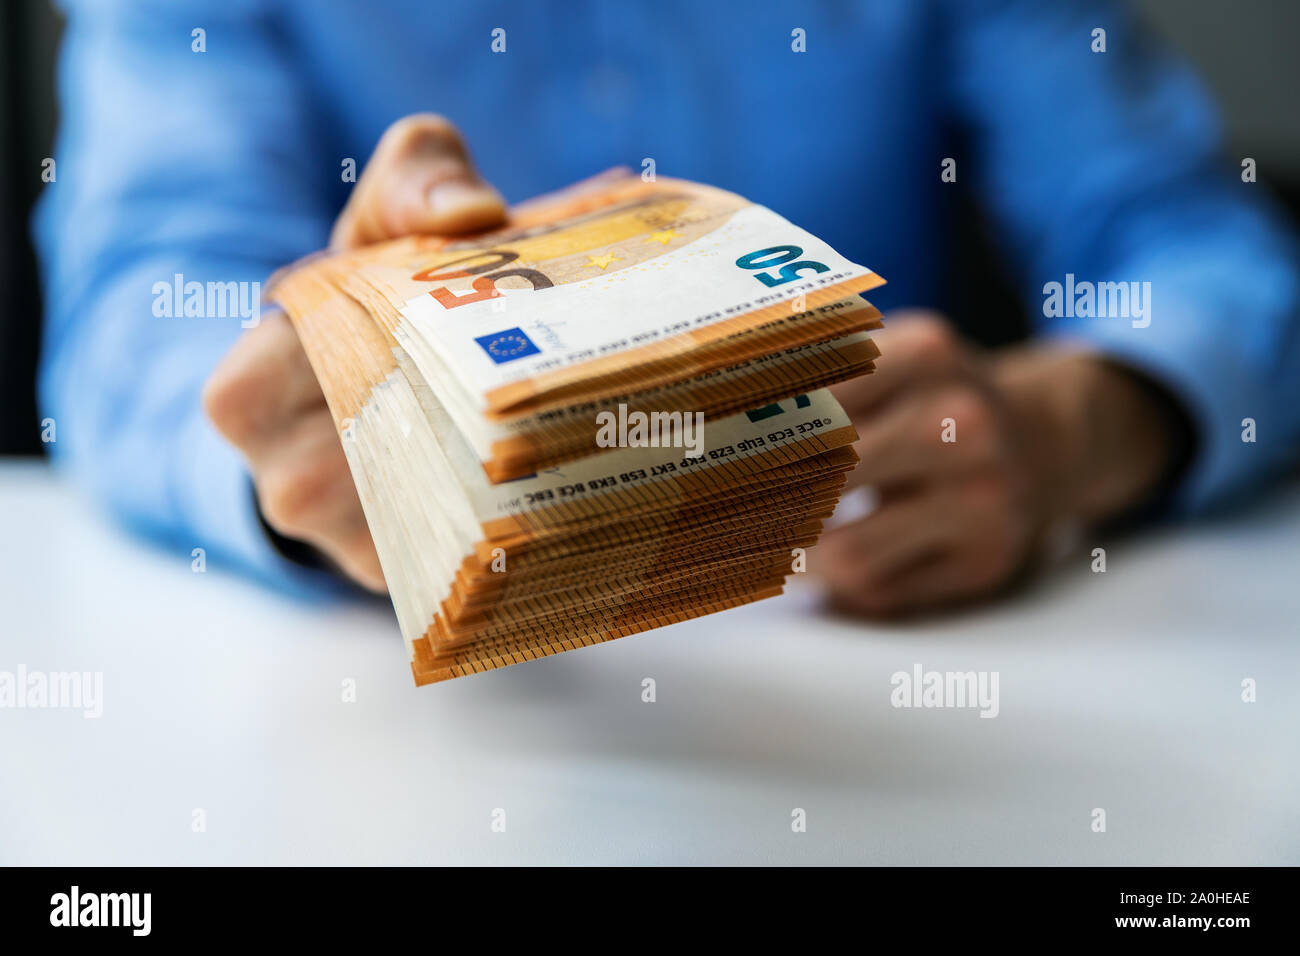 salary, money loan or prize concept - hand gives cash money Stock Photo